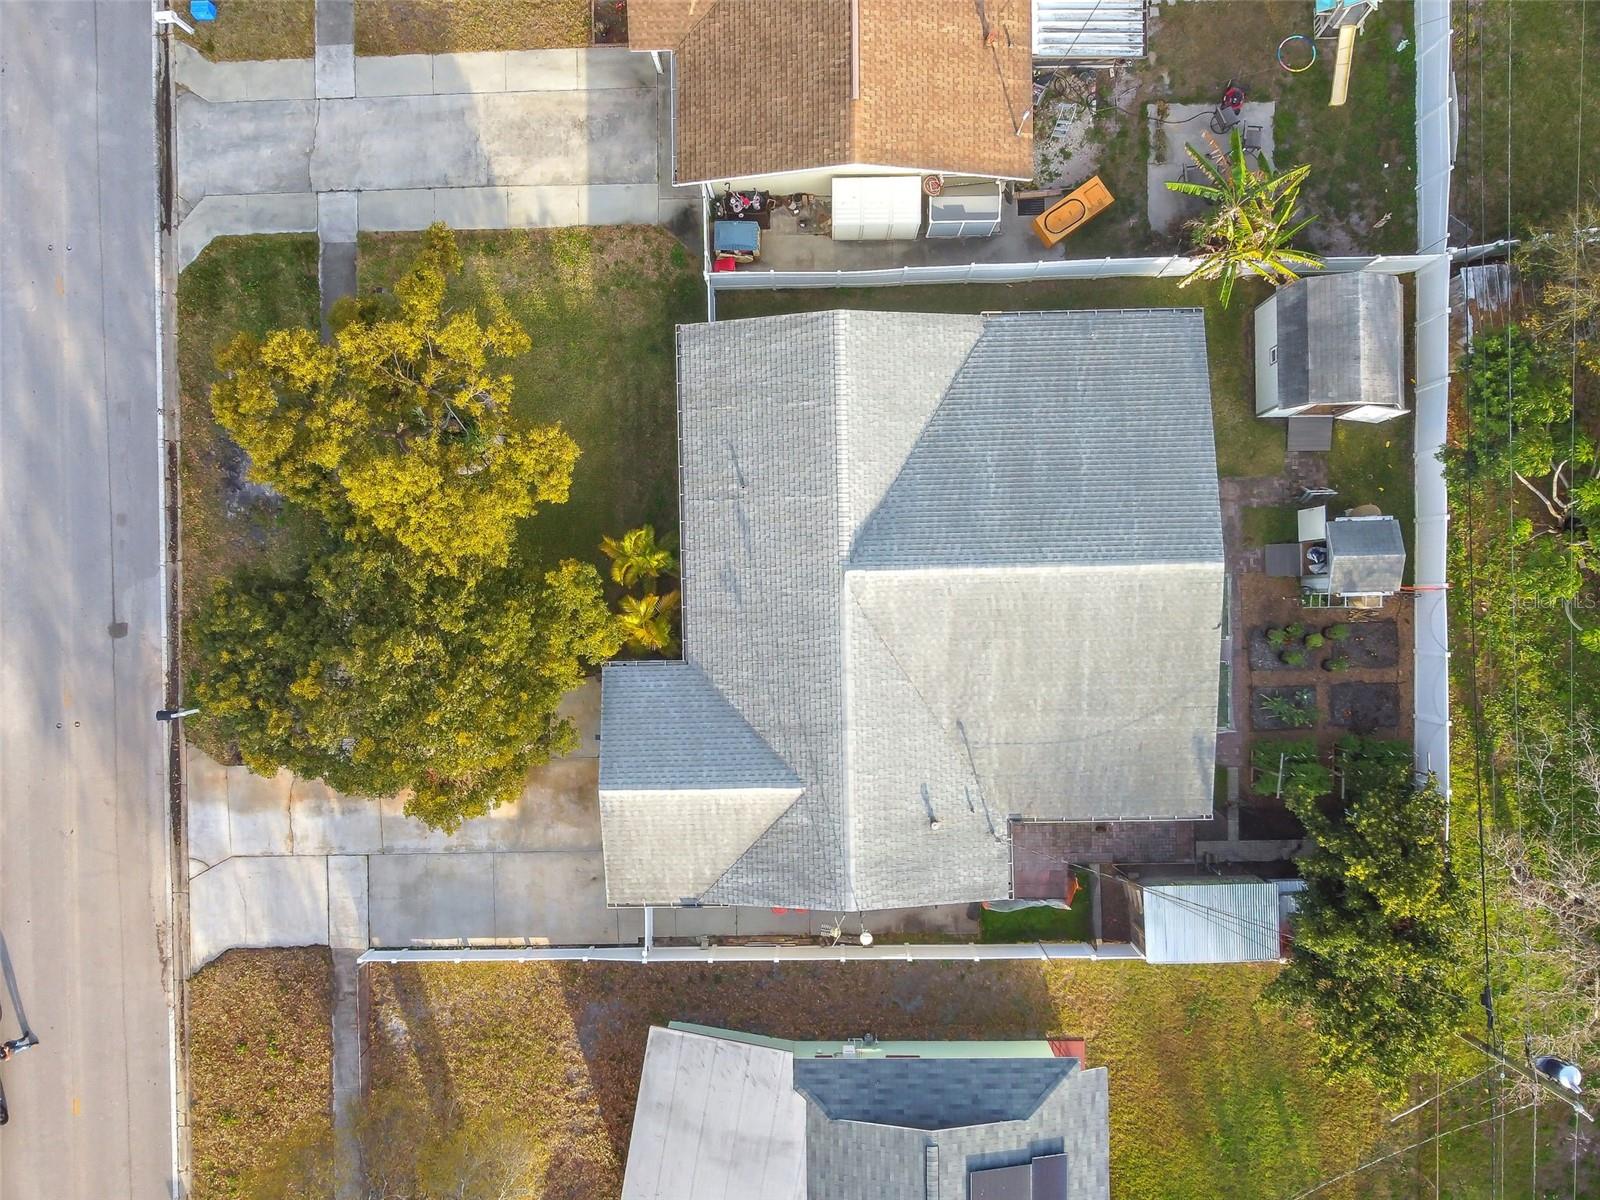 Drone view of property showing the backyard and sheds.